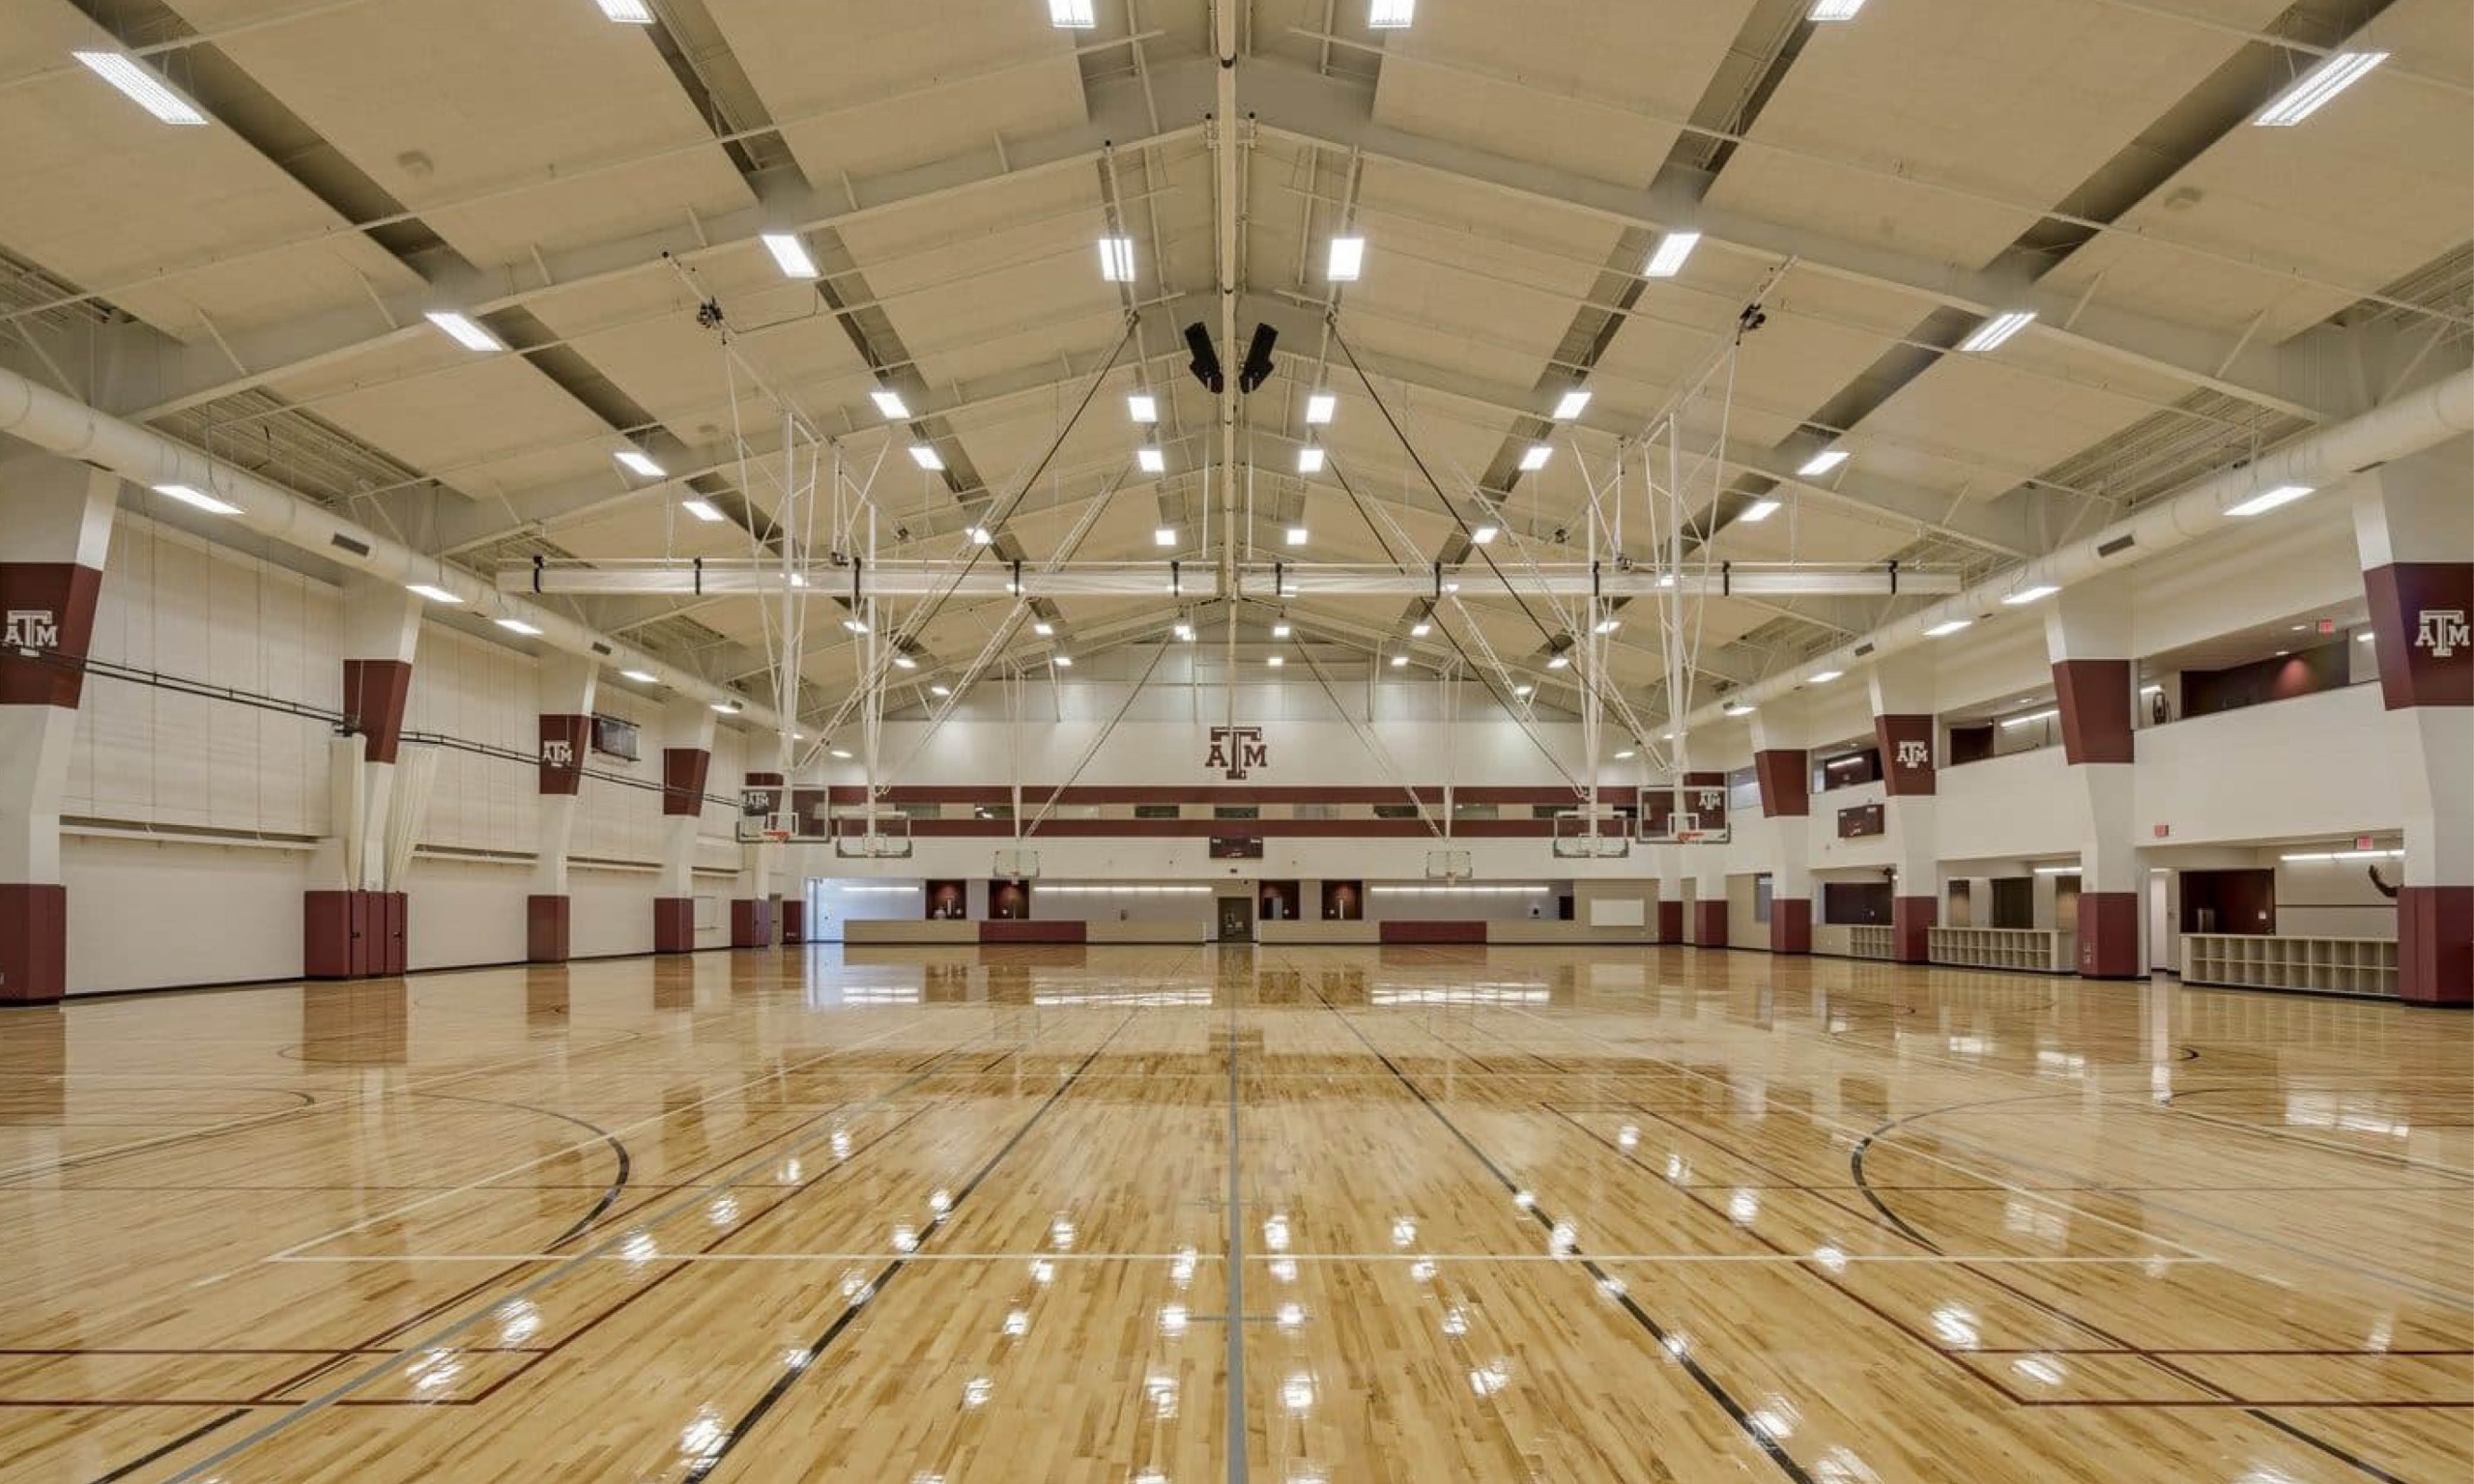 Spacious indoor basketball court with ceiling lights.